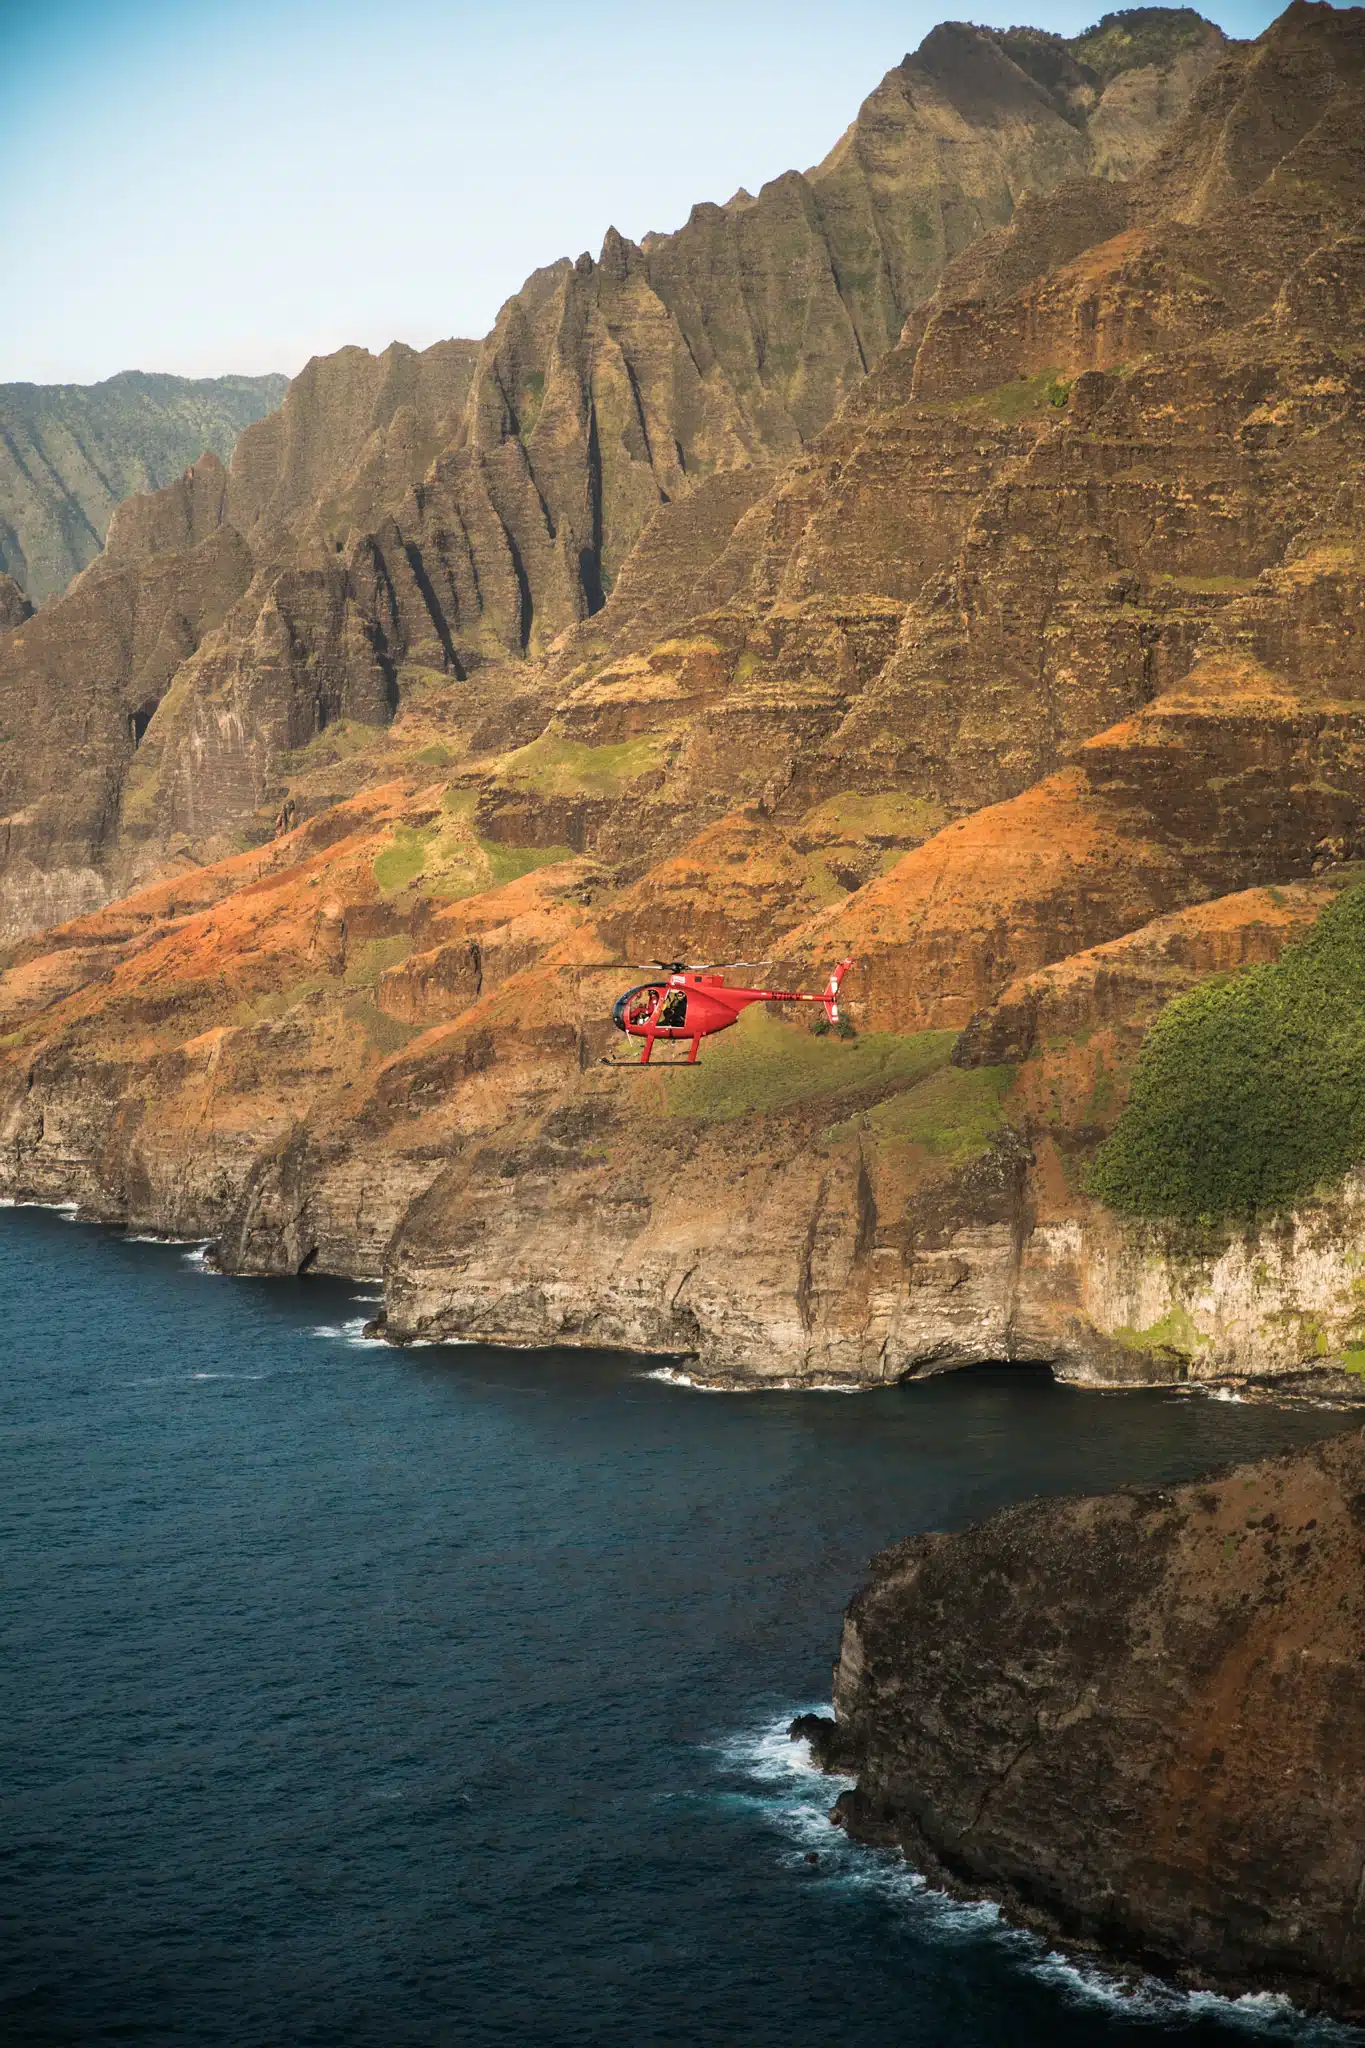 Hughes 500 Doors-Off Helicopter is a Air Activity located in the city of Lihue on Kauai, Hawaii